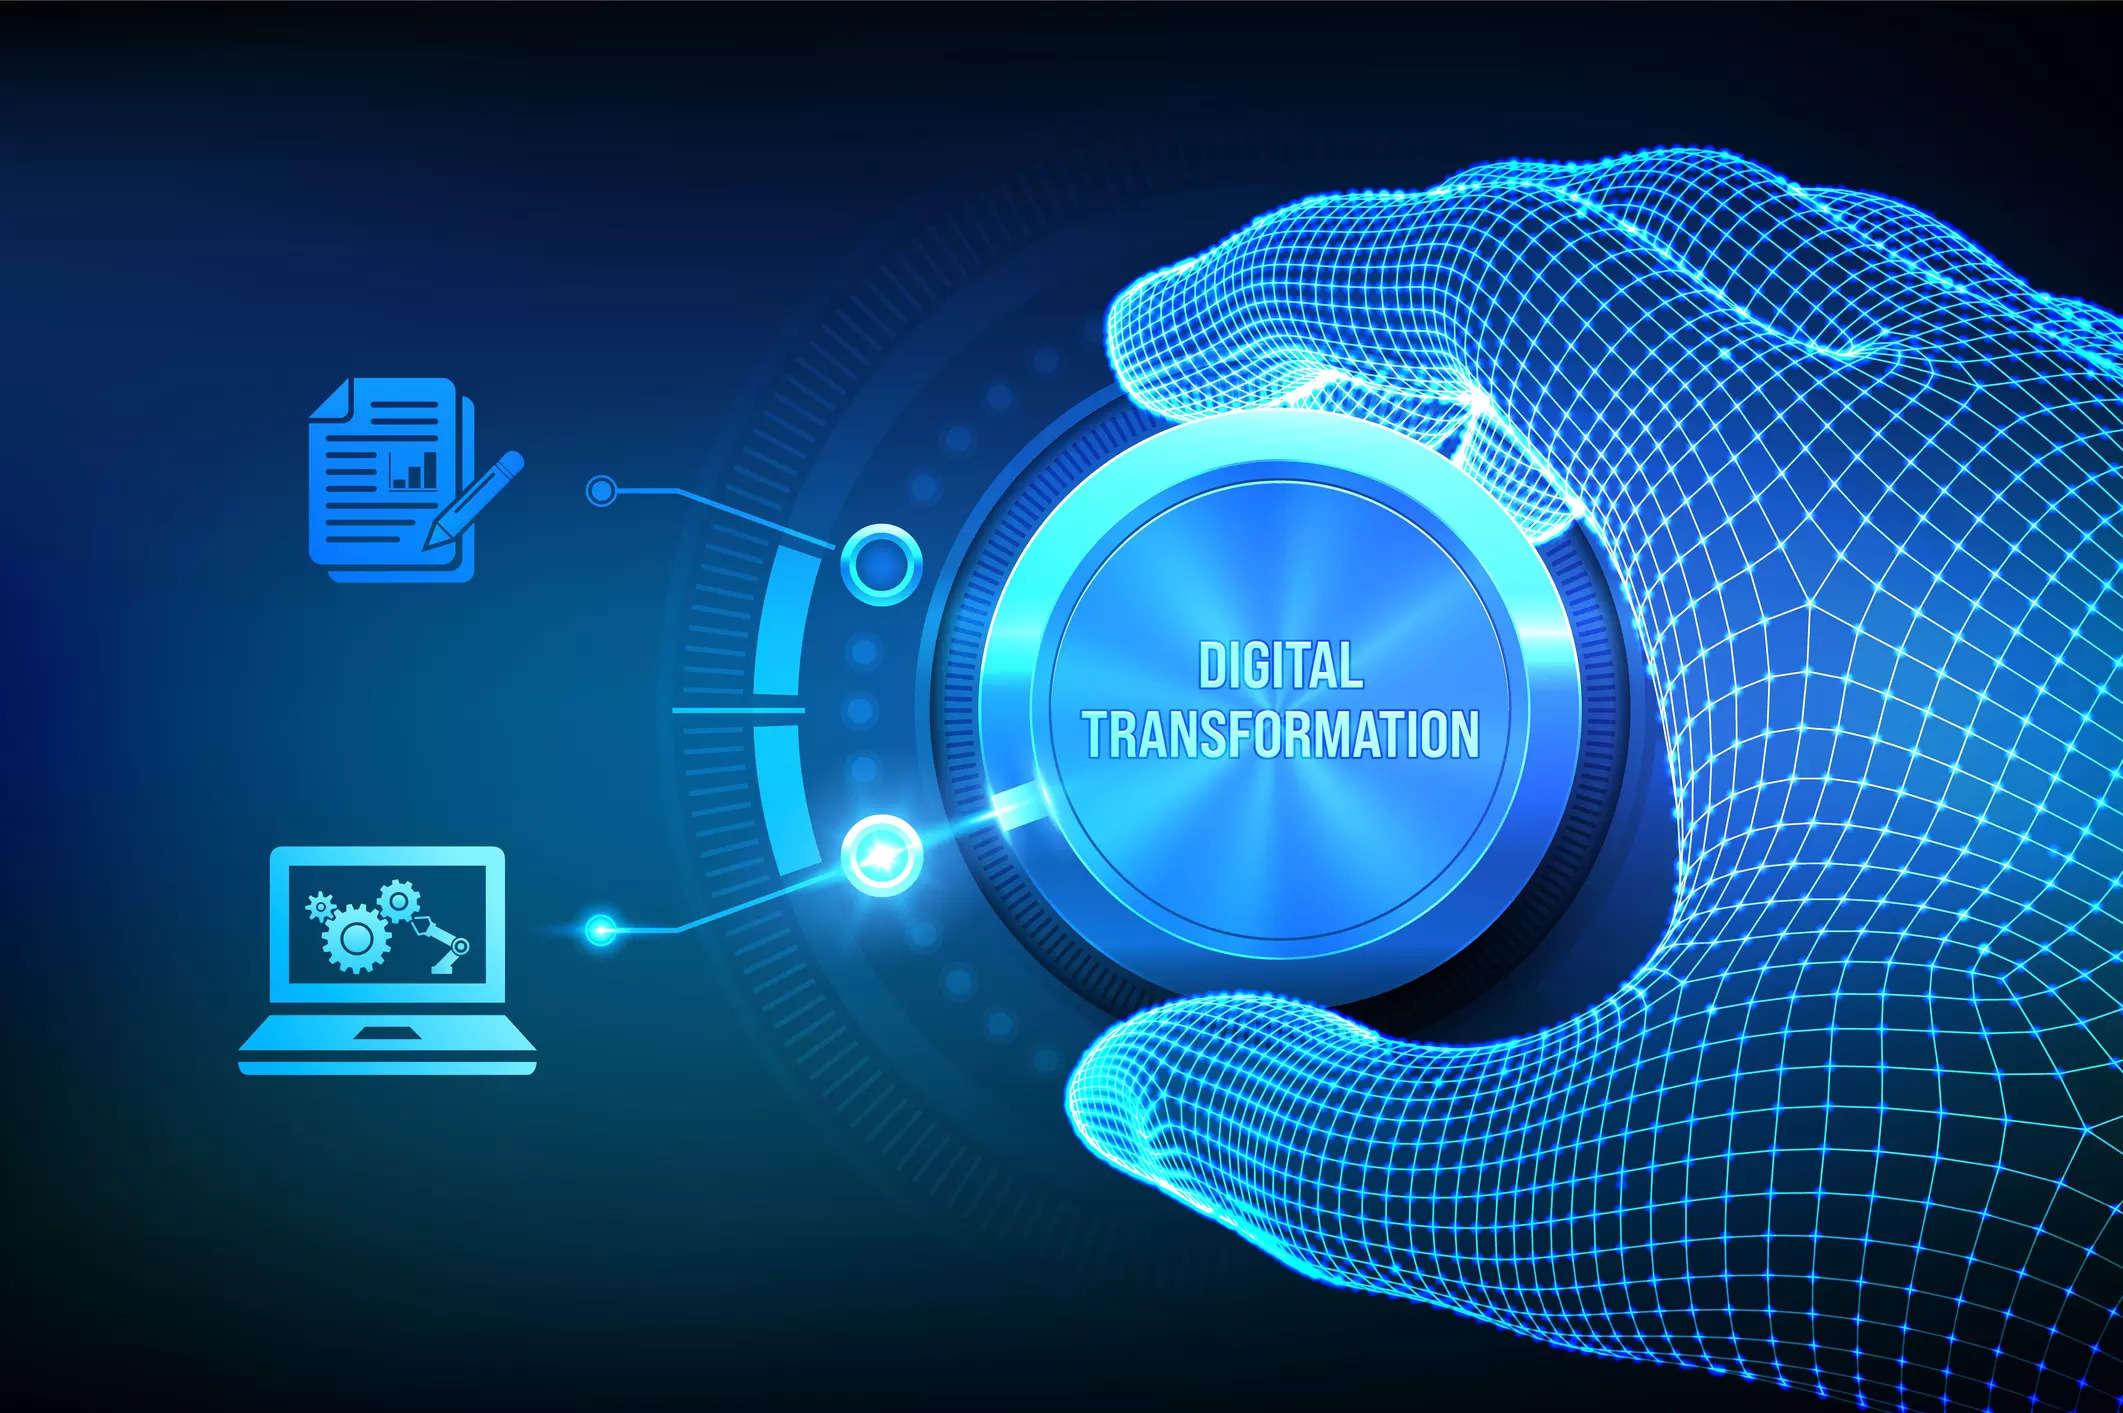 digital transformation: How and why digital transformation is sweeping  across Indian industries - The Economic Times